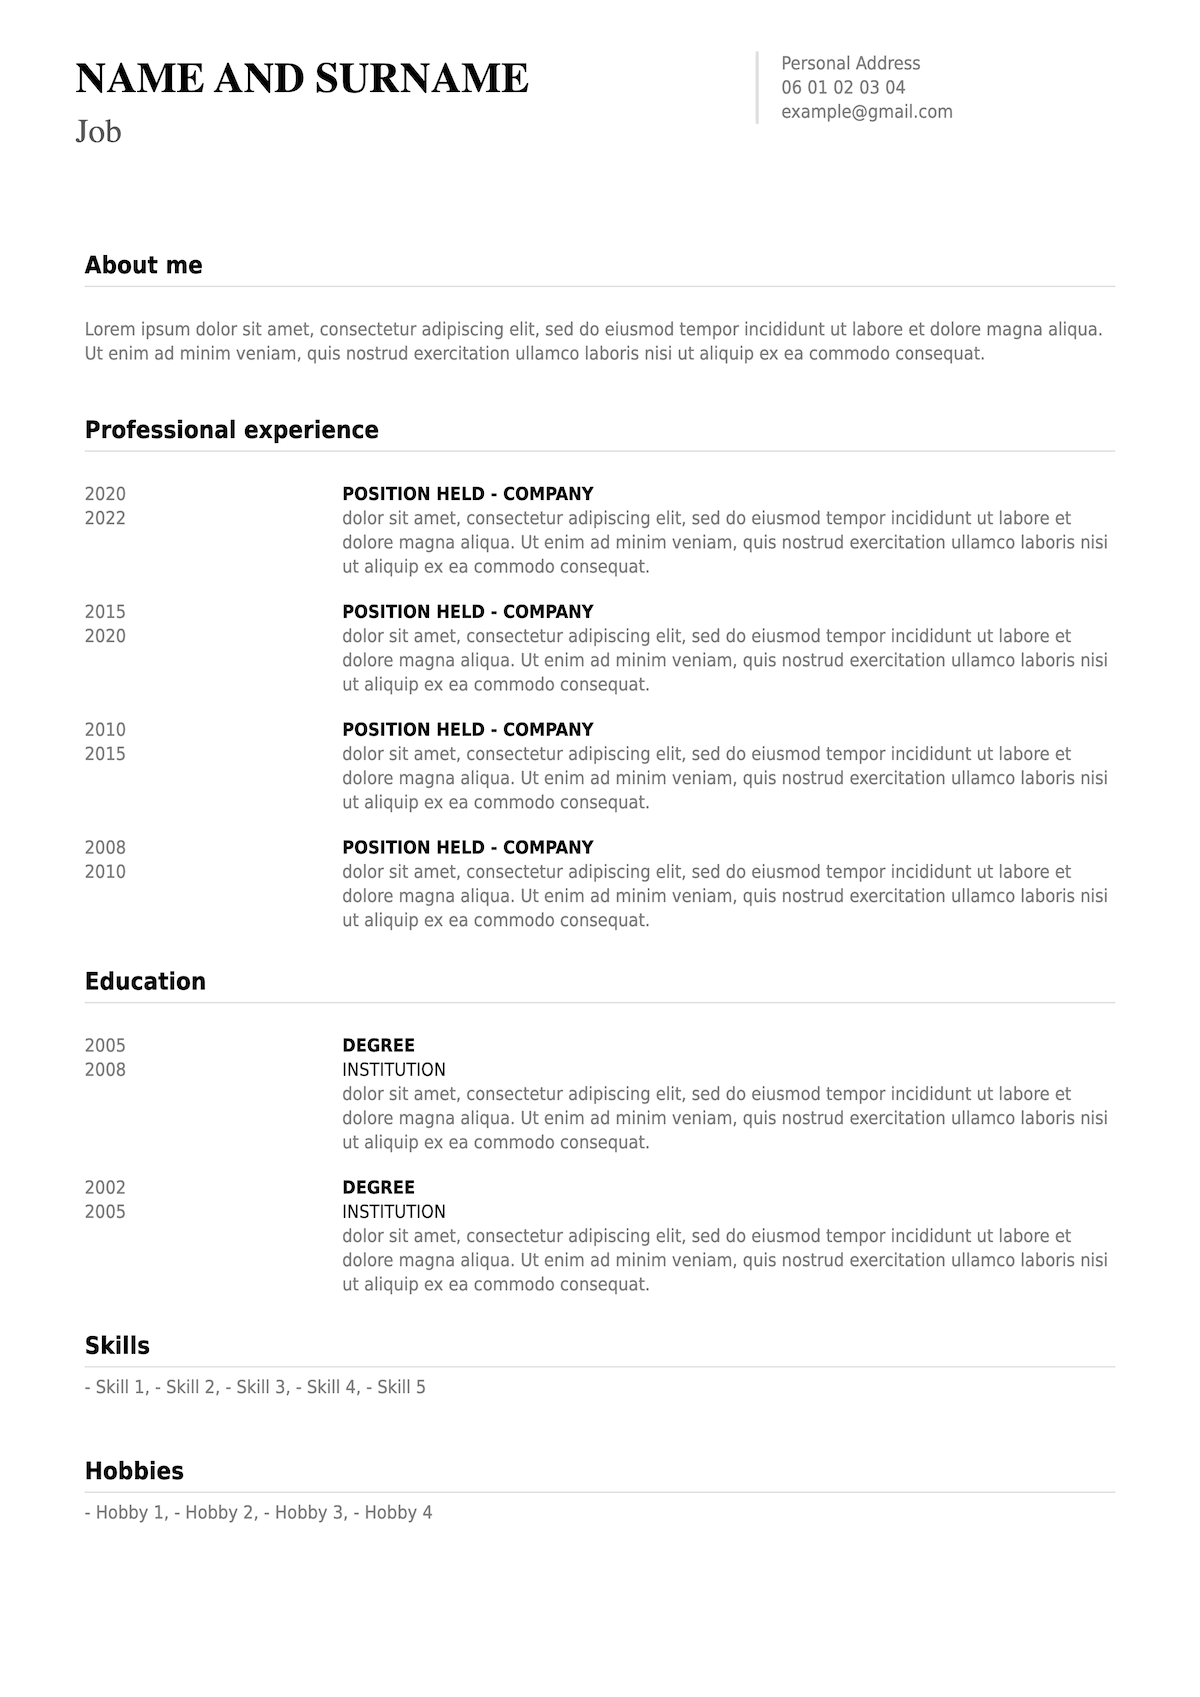 CV for students without picture